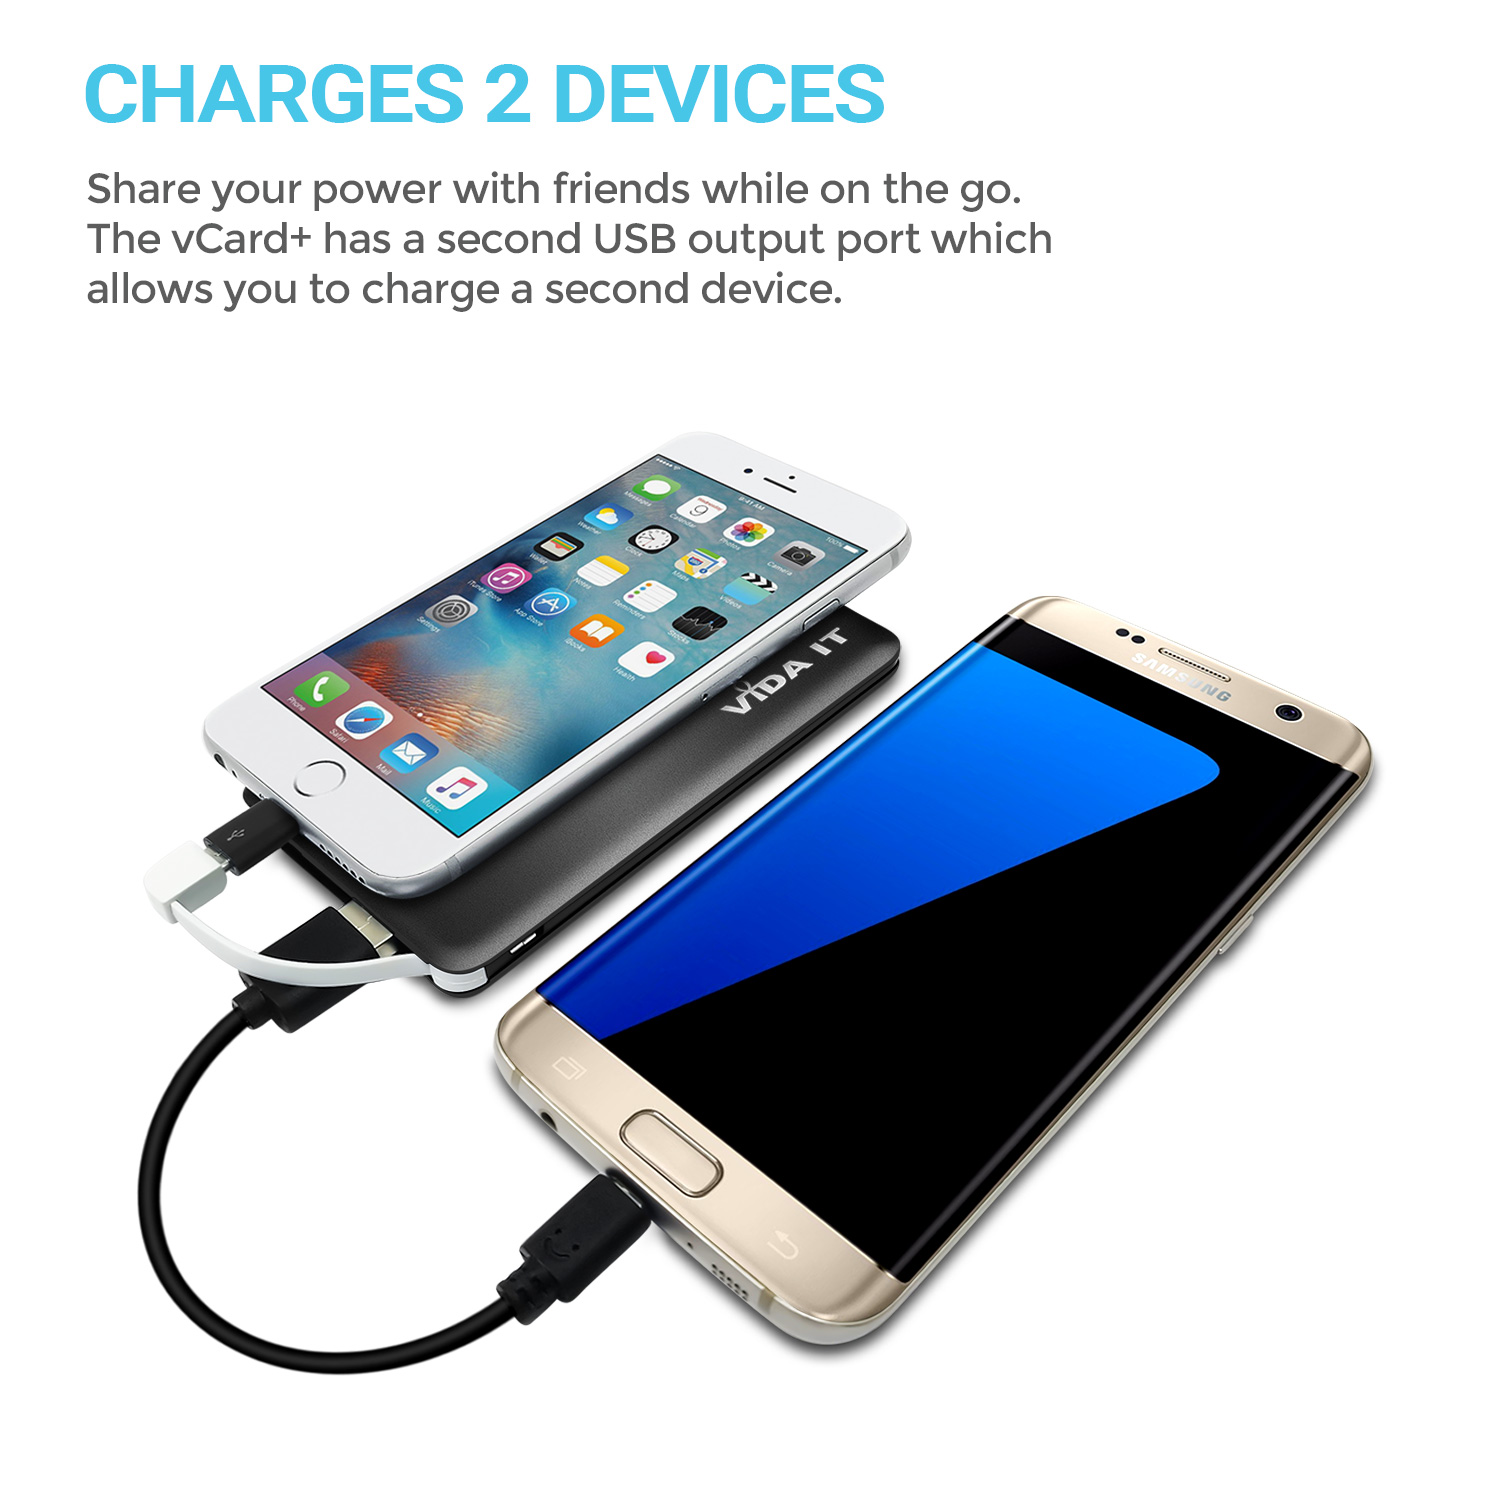 vCard+ 4000mAh slim power bank Capacity dual port USB external battery pack thin portable USB charger with built-in micro-usb charging cable plus two adapters for iPhone and type-C usb-c connectors for iPhone iPad Android mobile phone smartphone tablet pc